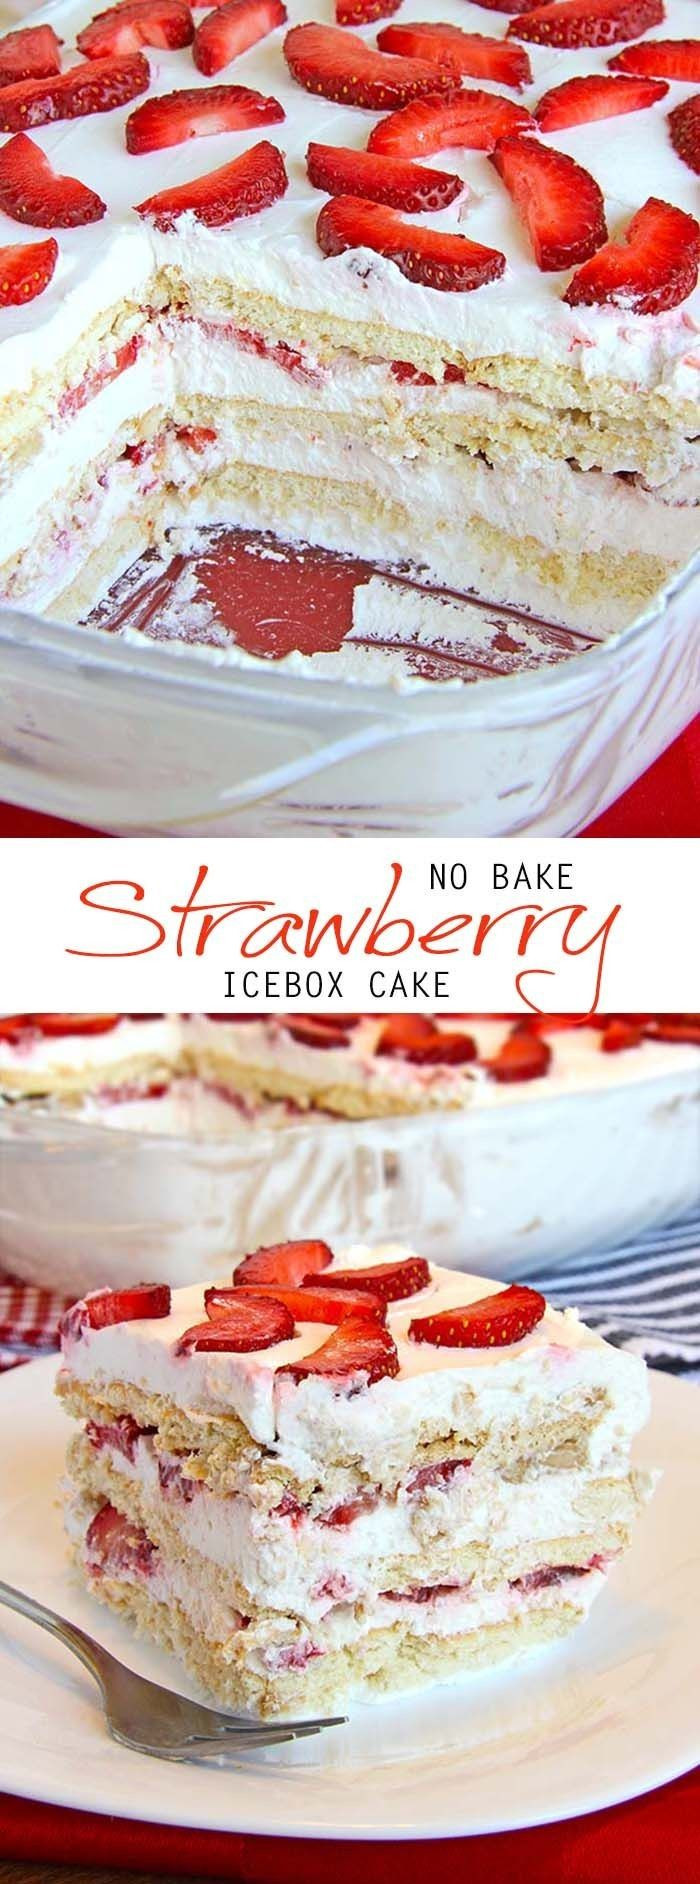 Quick And Easy Summer Desserts
 Looking for a quick and easy Spring Summer dessert recipe